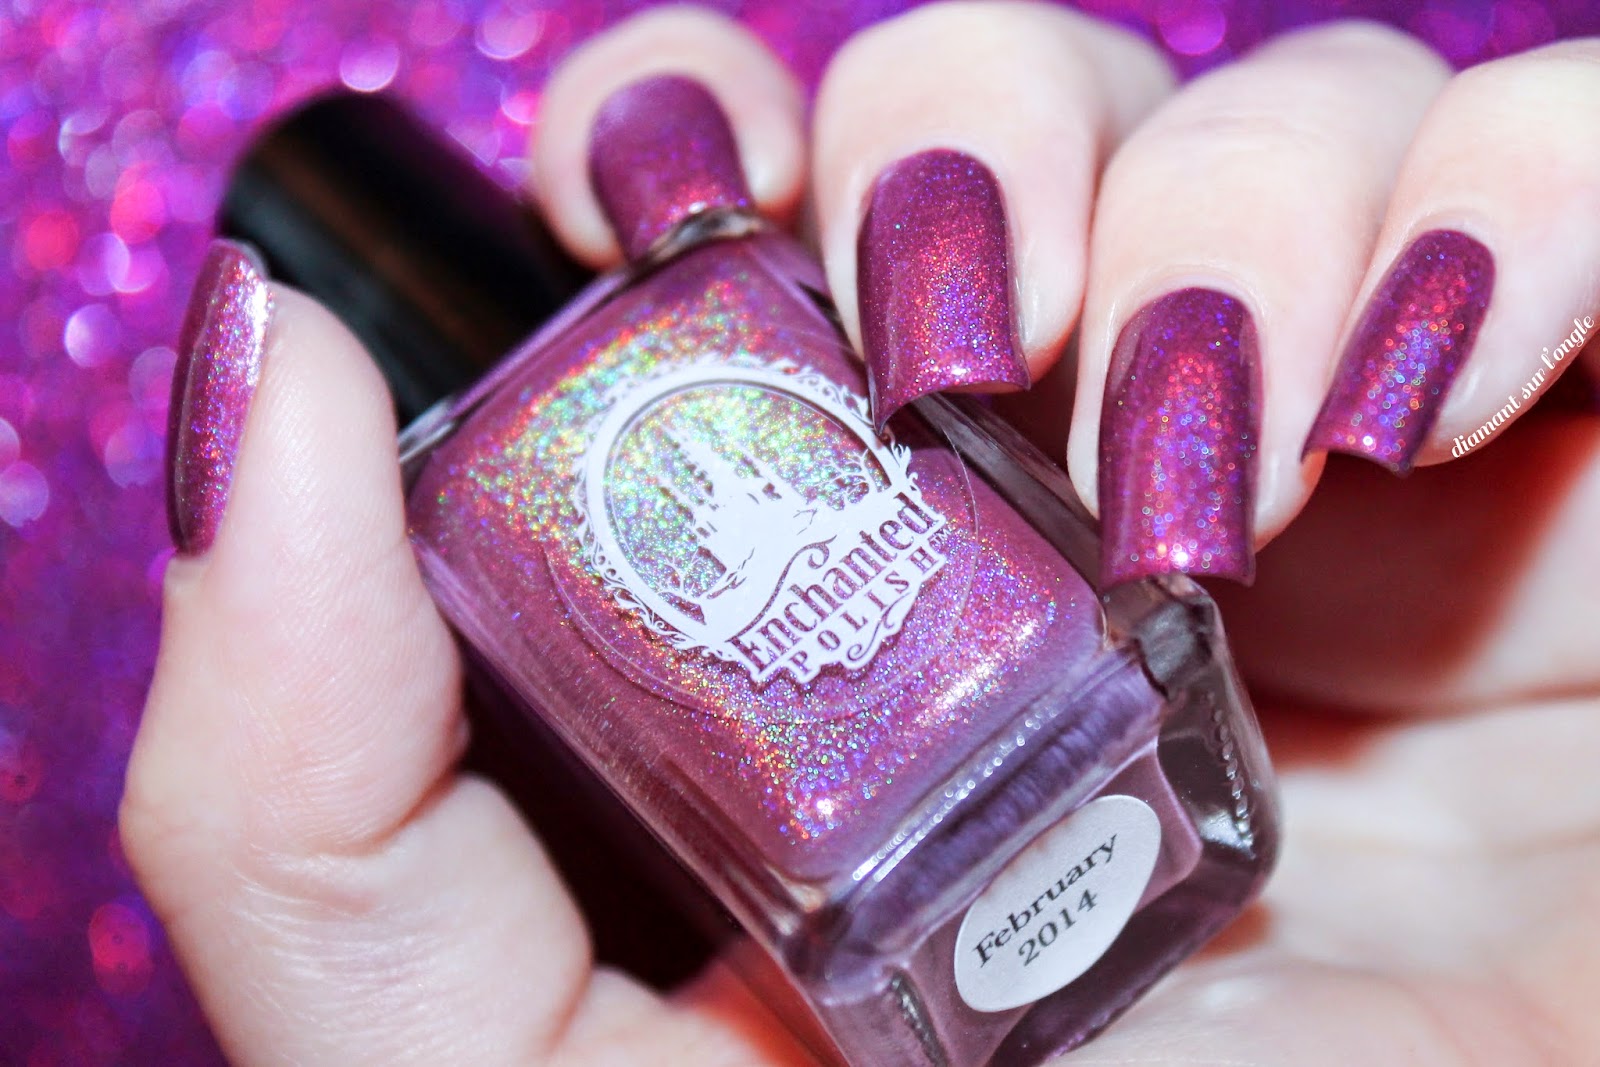 Swatch of February 2014 by Enchanted Polish